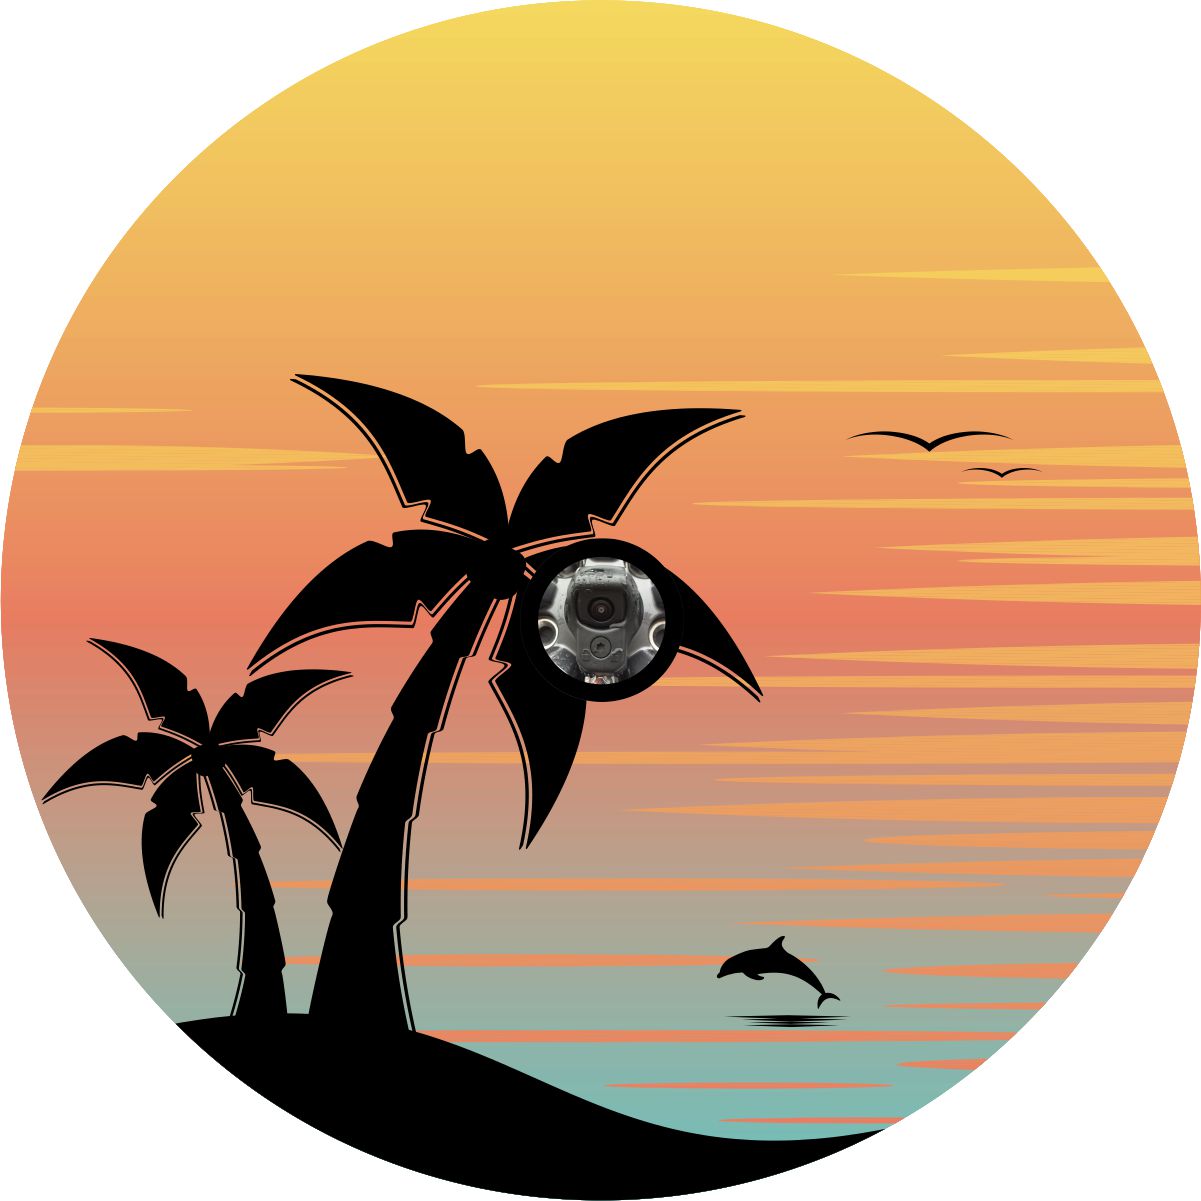 Spare tire cover design with a back up camera of pastel colored tropical scene landscape with the silhouette of palm trees, dolphins, and seagulls at sunset